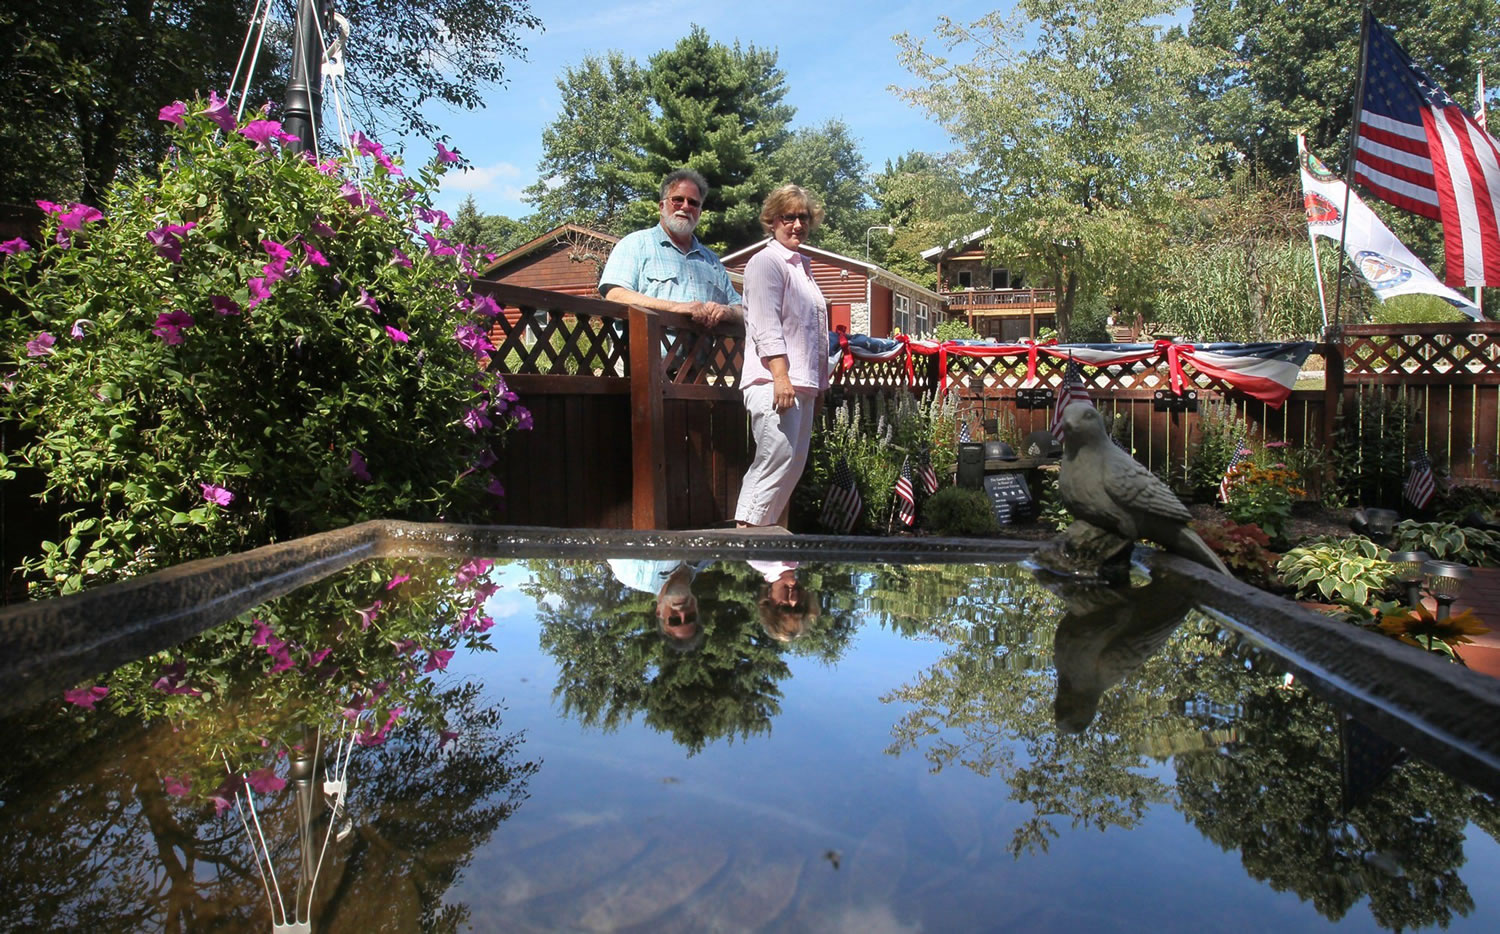 Mark Pollock and Kathy Roby are reflected in a birdbath in their memory garden at their home in Suffield Township, Ohio.